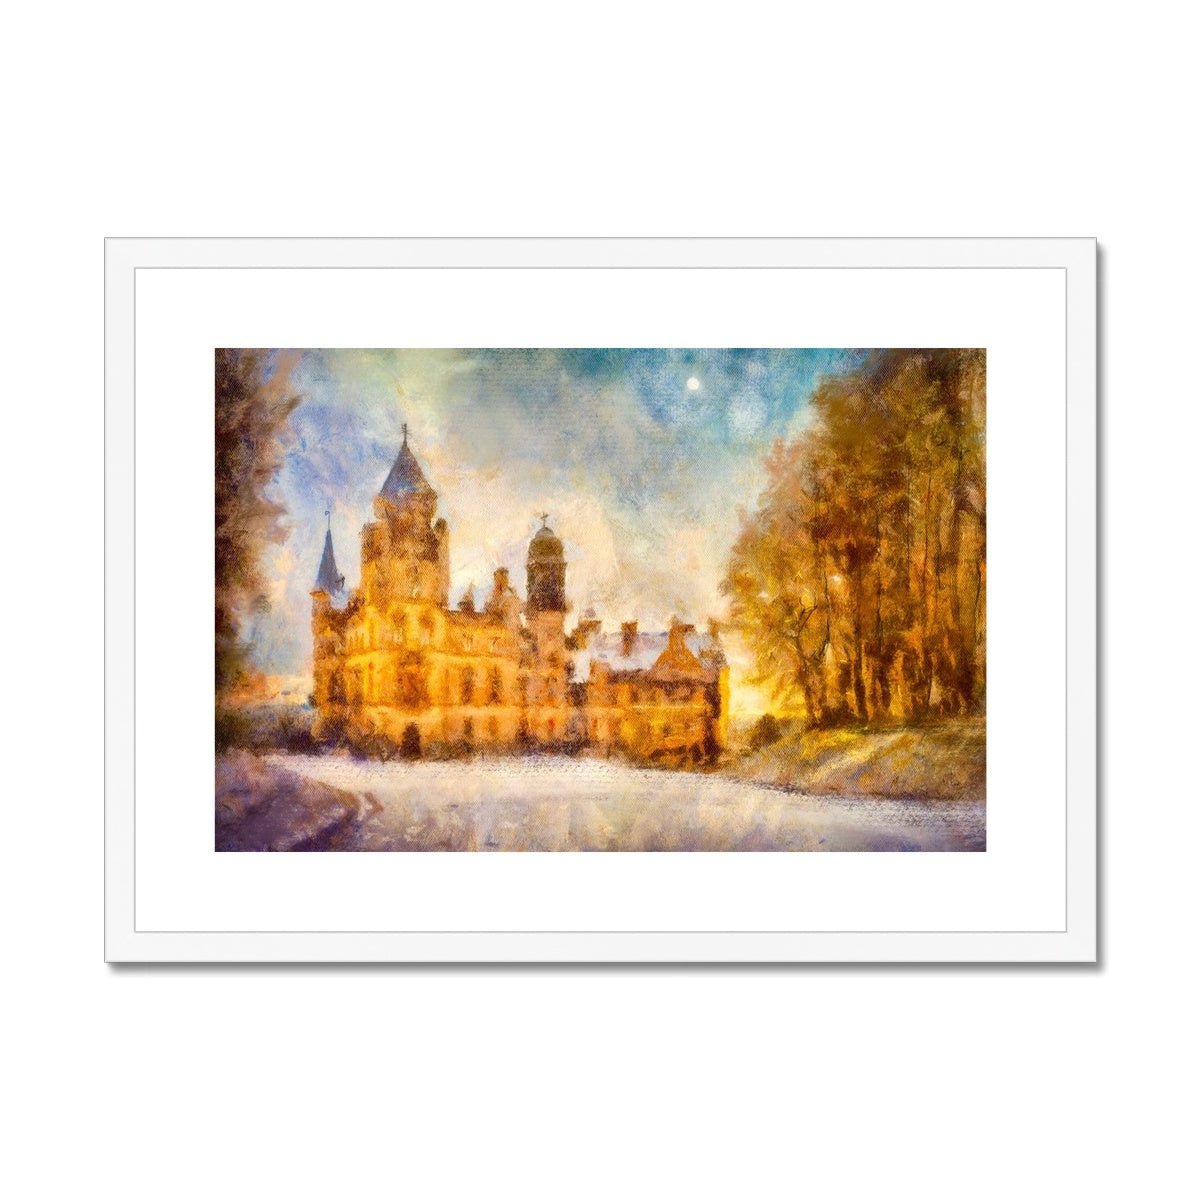 Dunrobin Castle Moonlight Painting | Framed & Mounted Prints From Scotland-Framed & Mounted Prints-Historic & Iconic Scotland Art Gallery-A2 Landscape-White Frame-Paintings, Prints, Homeware, Art Gifts From Scotland By Scottish Artist Kevin Hunter